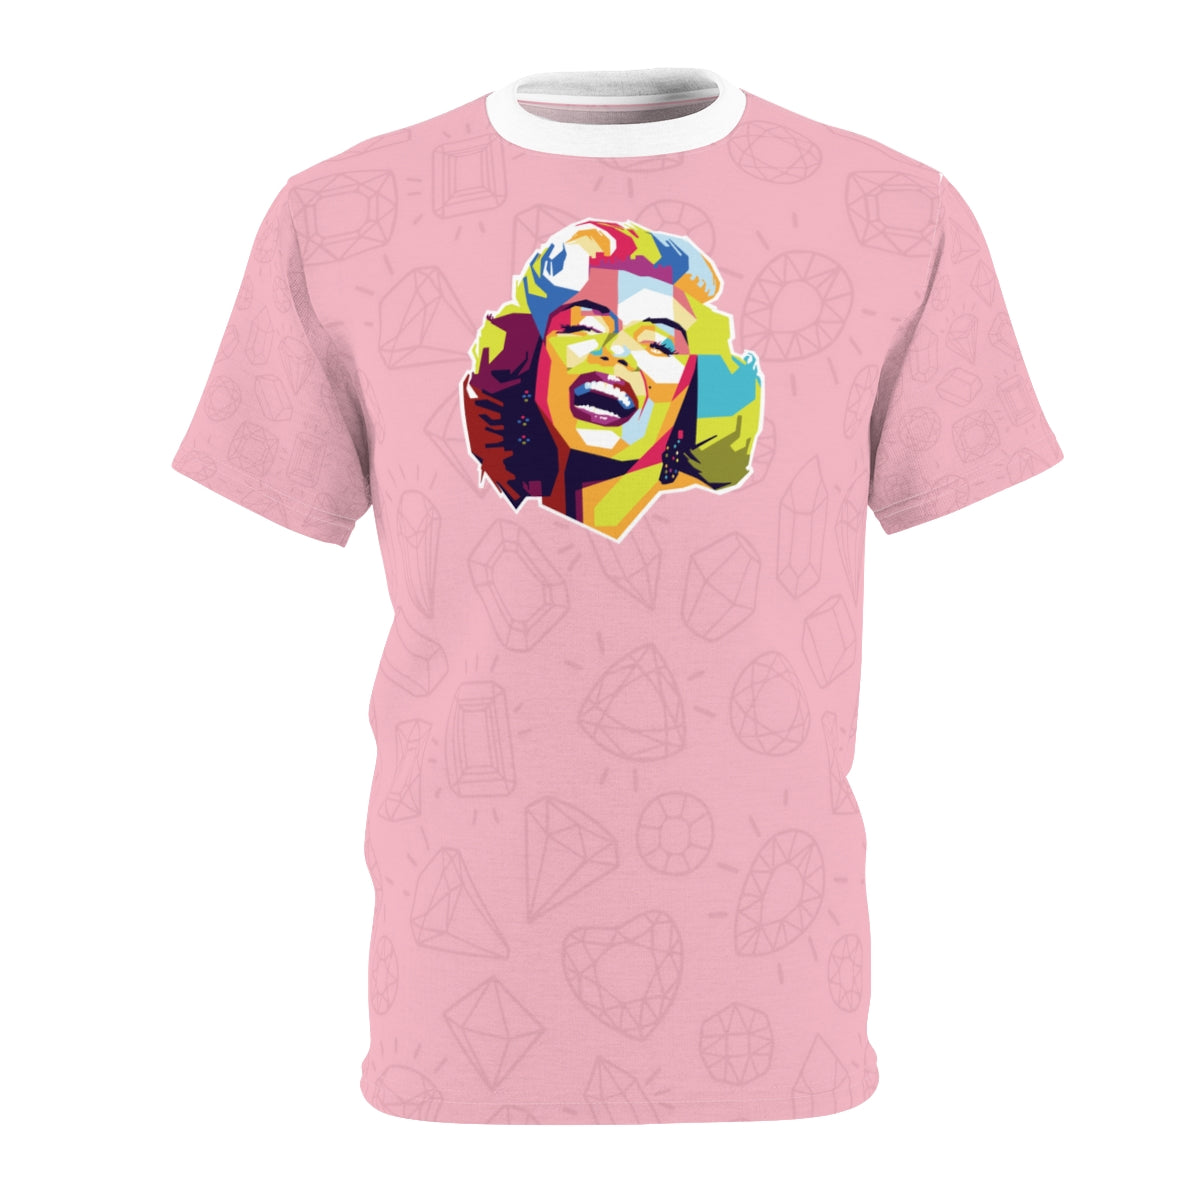 Glam Grin – Limited Edition – Unisex Cut & Sew Tee